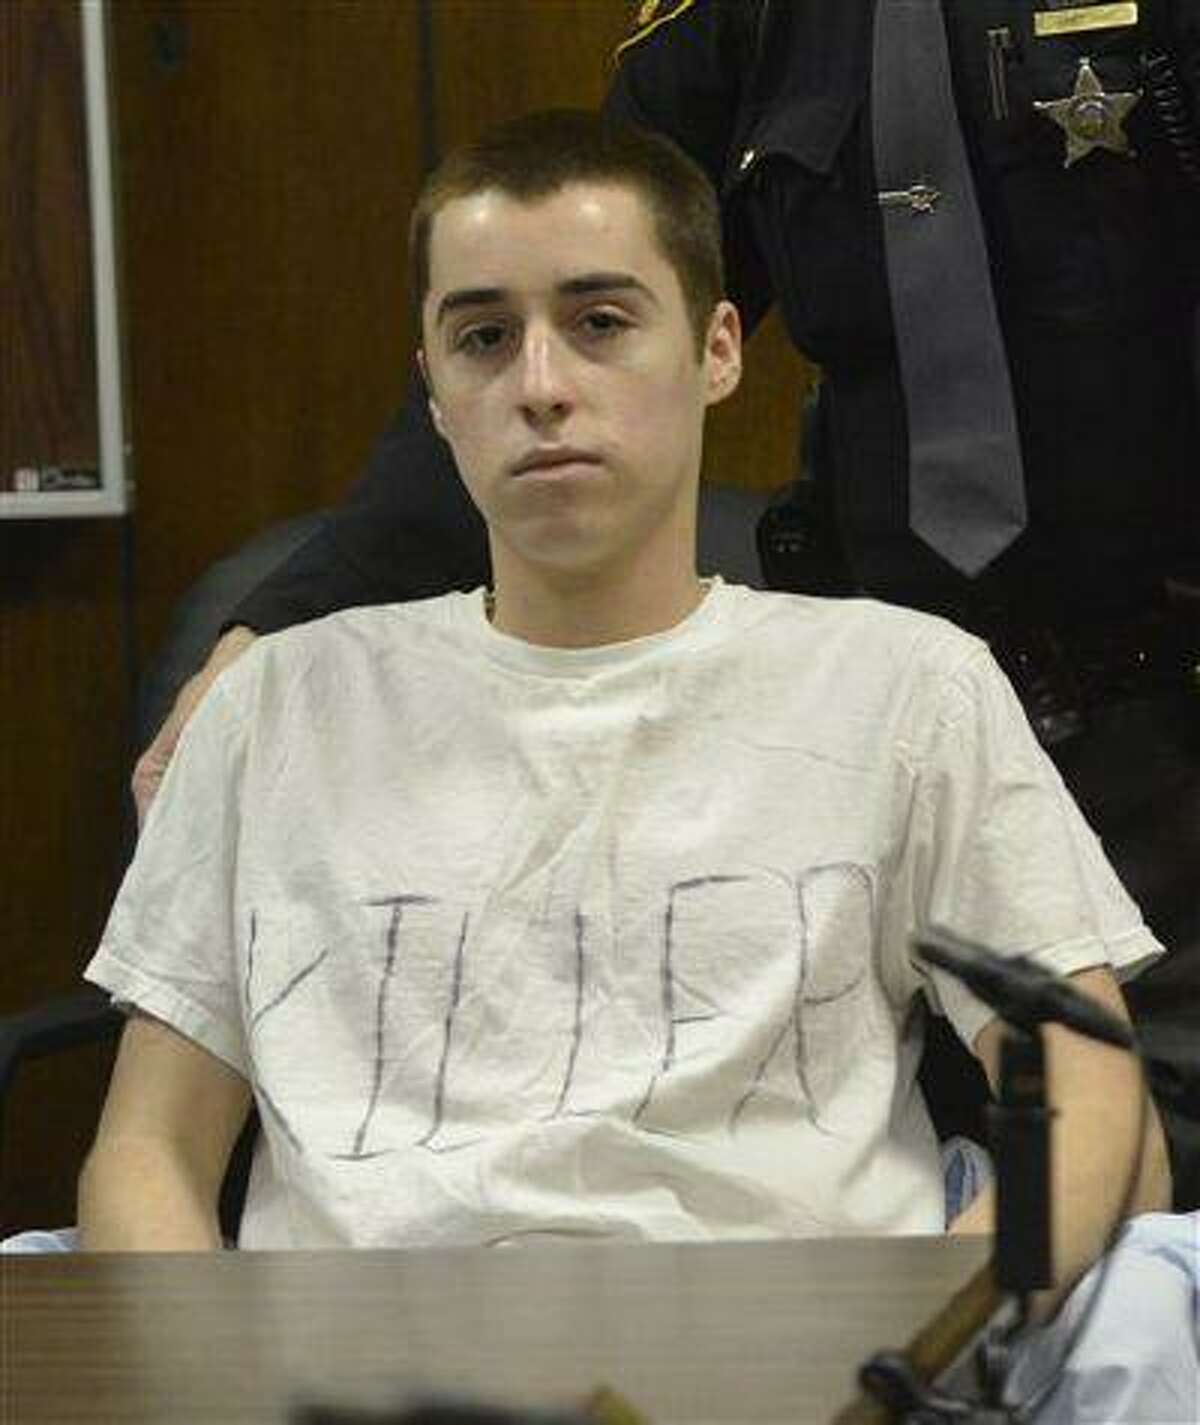 T.J. Lane sits in court during sentencing Tuesday, March 19, 2013, in Chardon, Ohio.